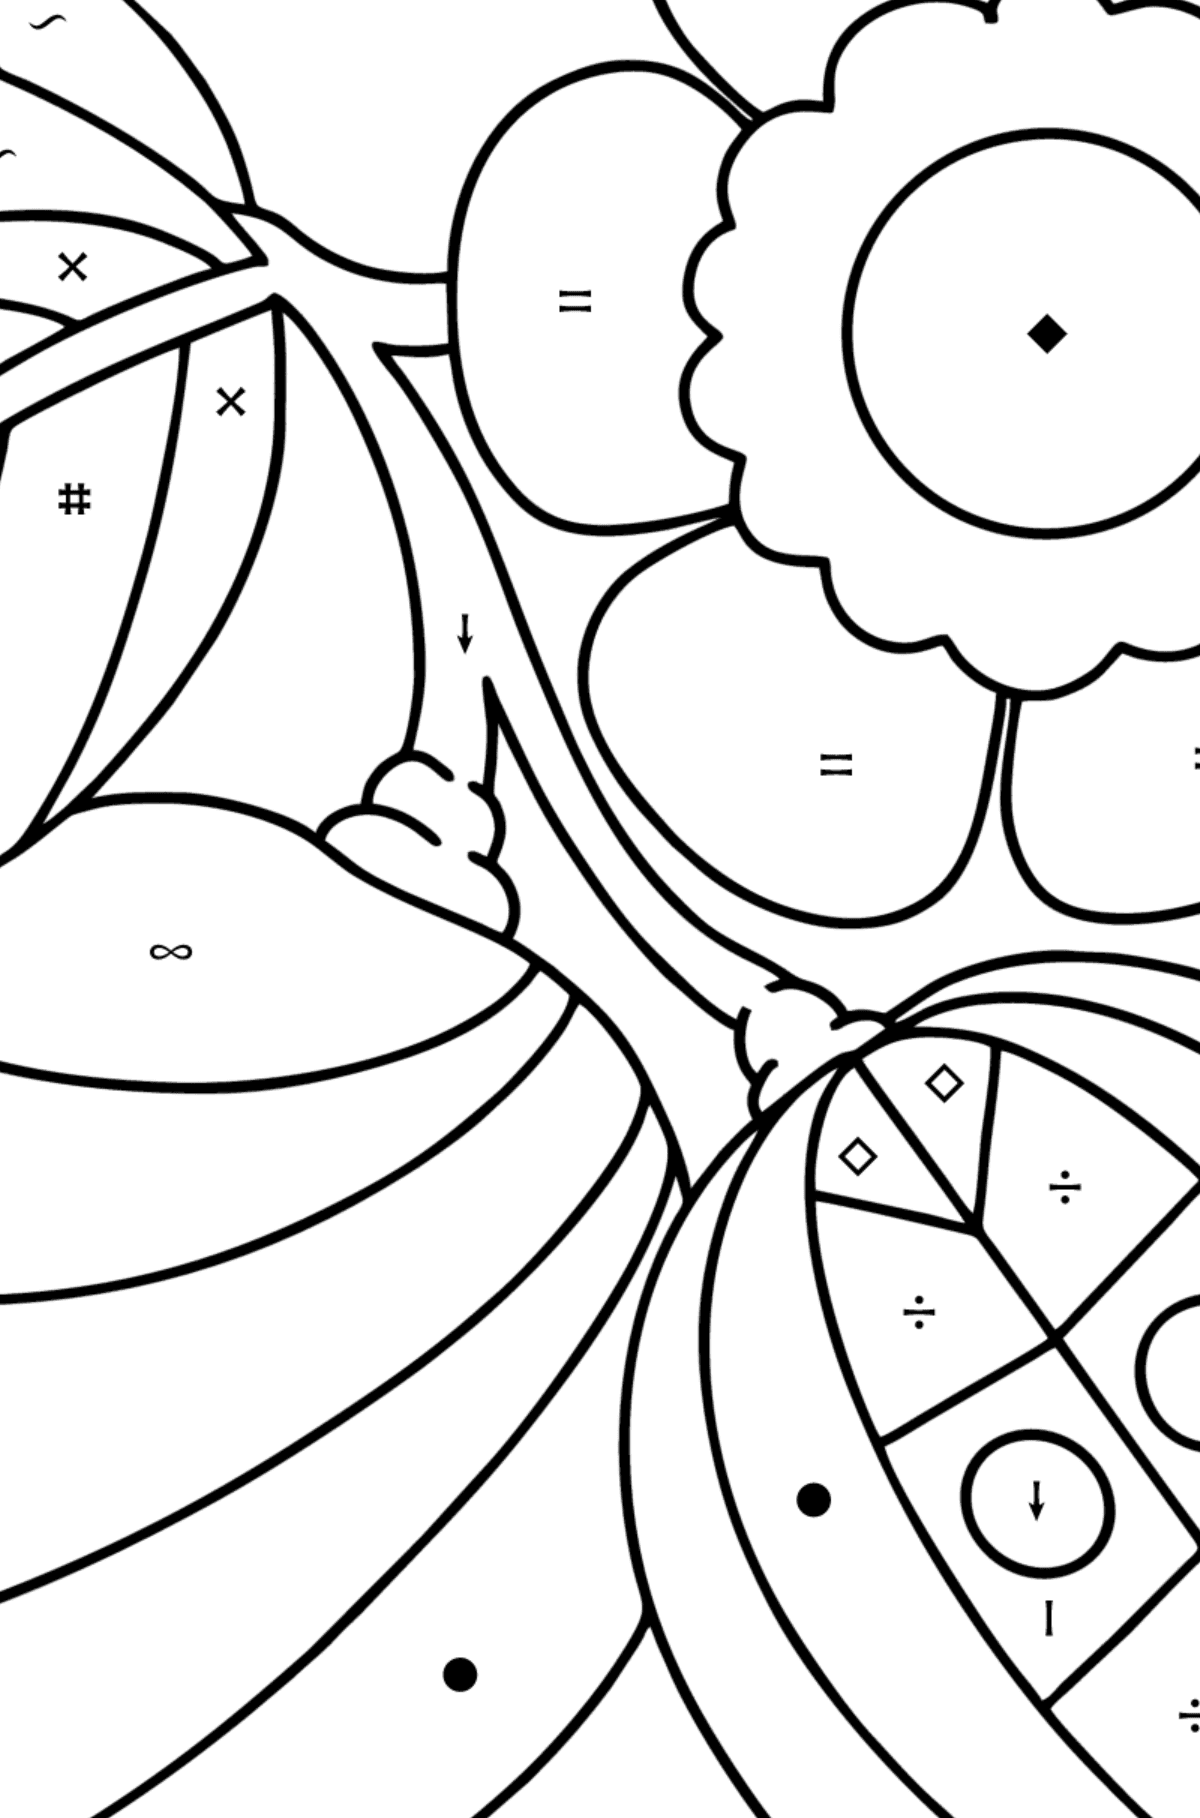 Anxiety stress relief Lemon coloring page - Coloring by Symbols for Kids